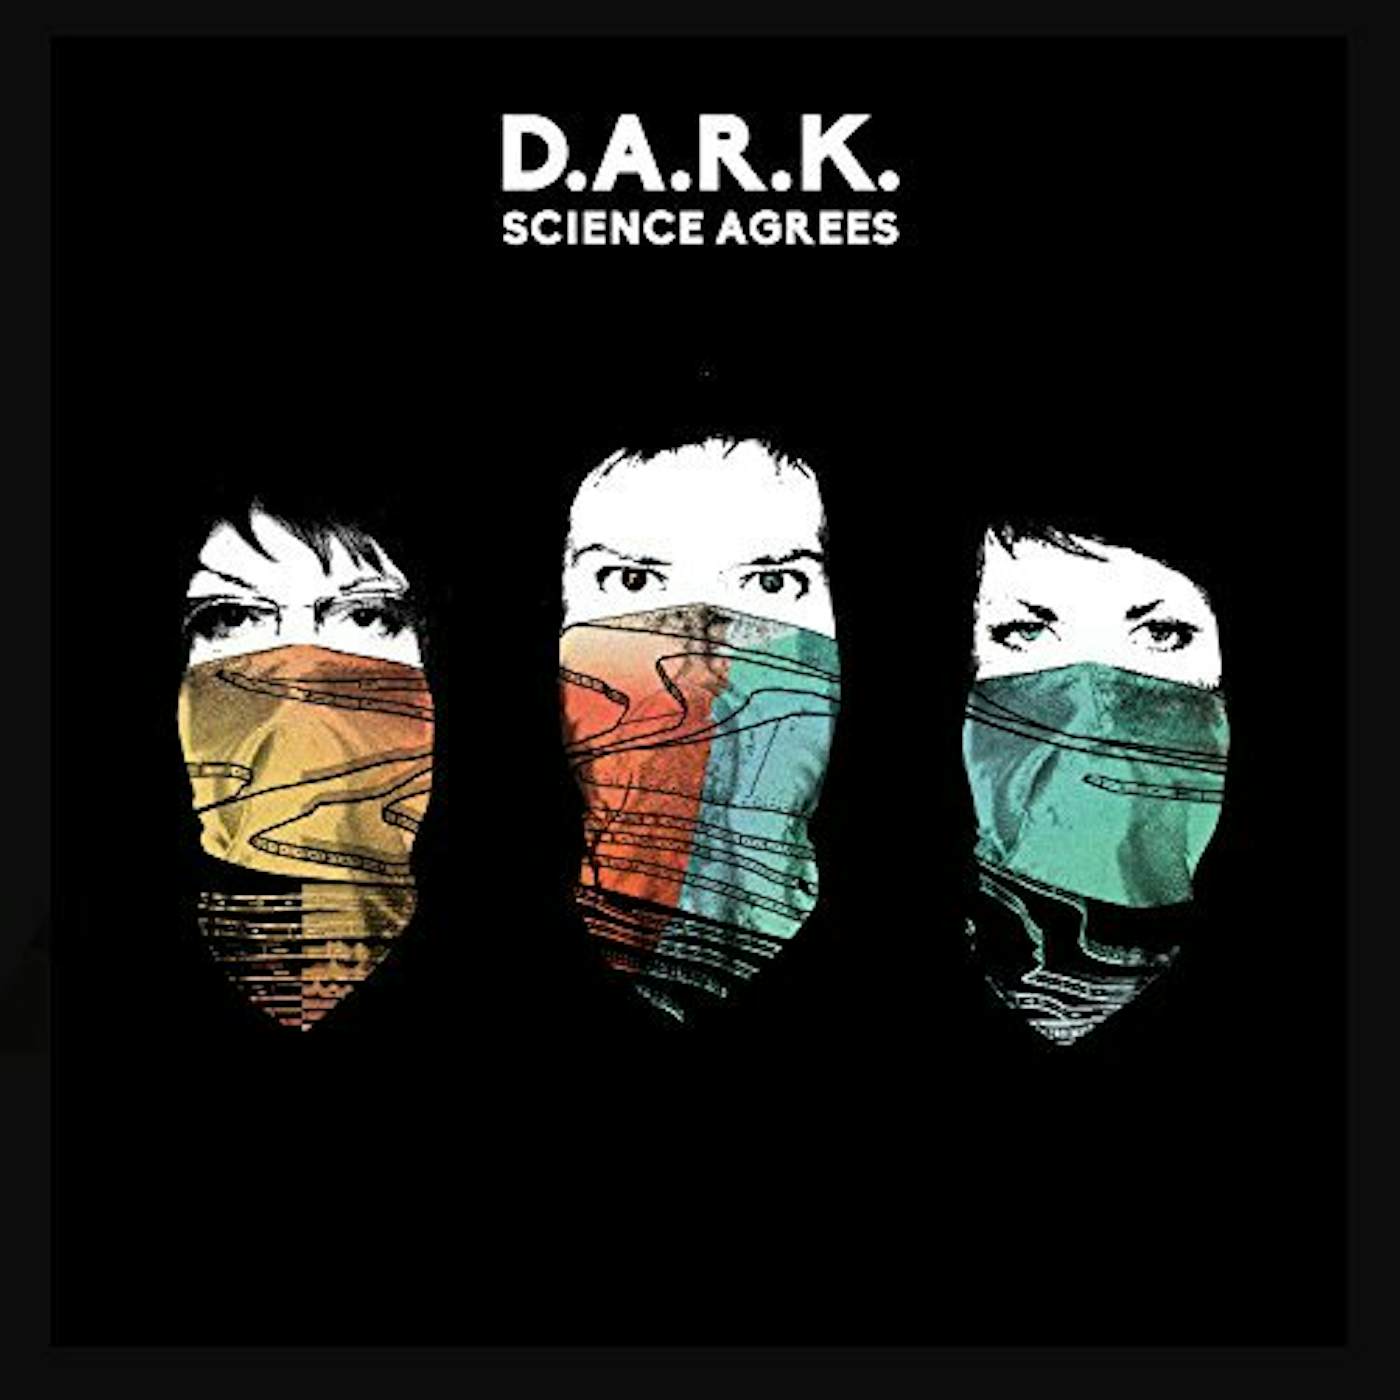 D.A.R.K. Science Agrees Vinyl Record